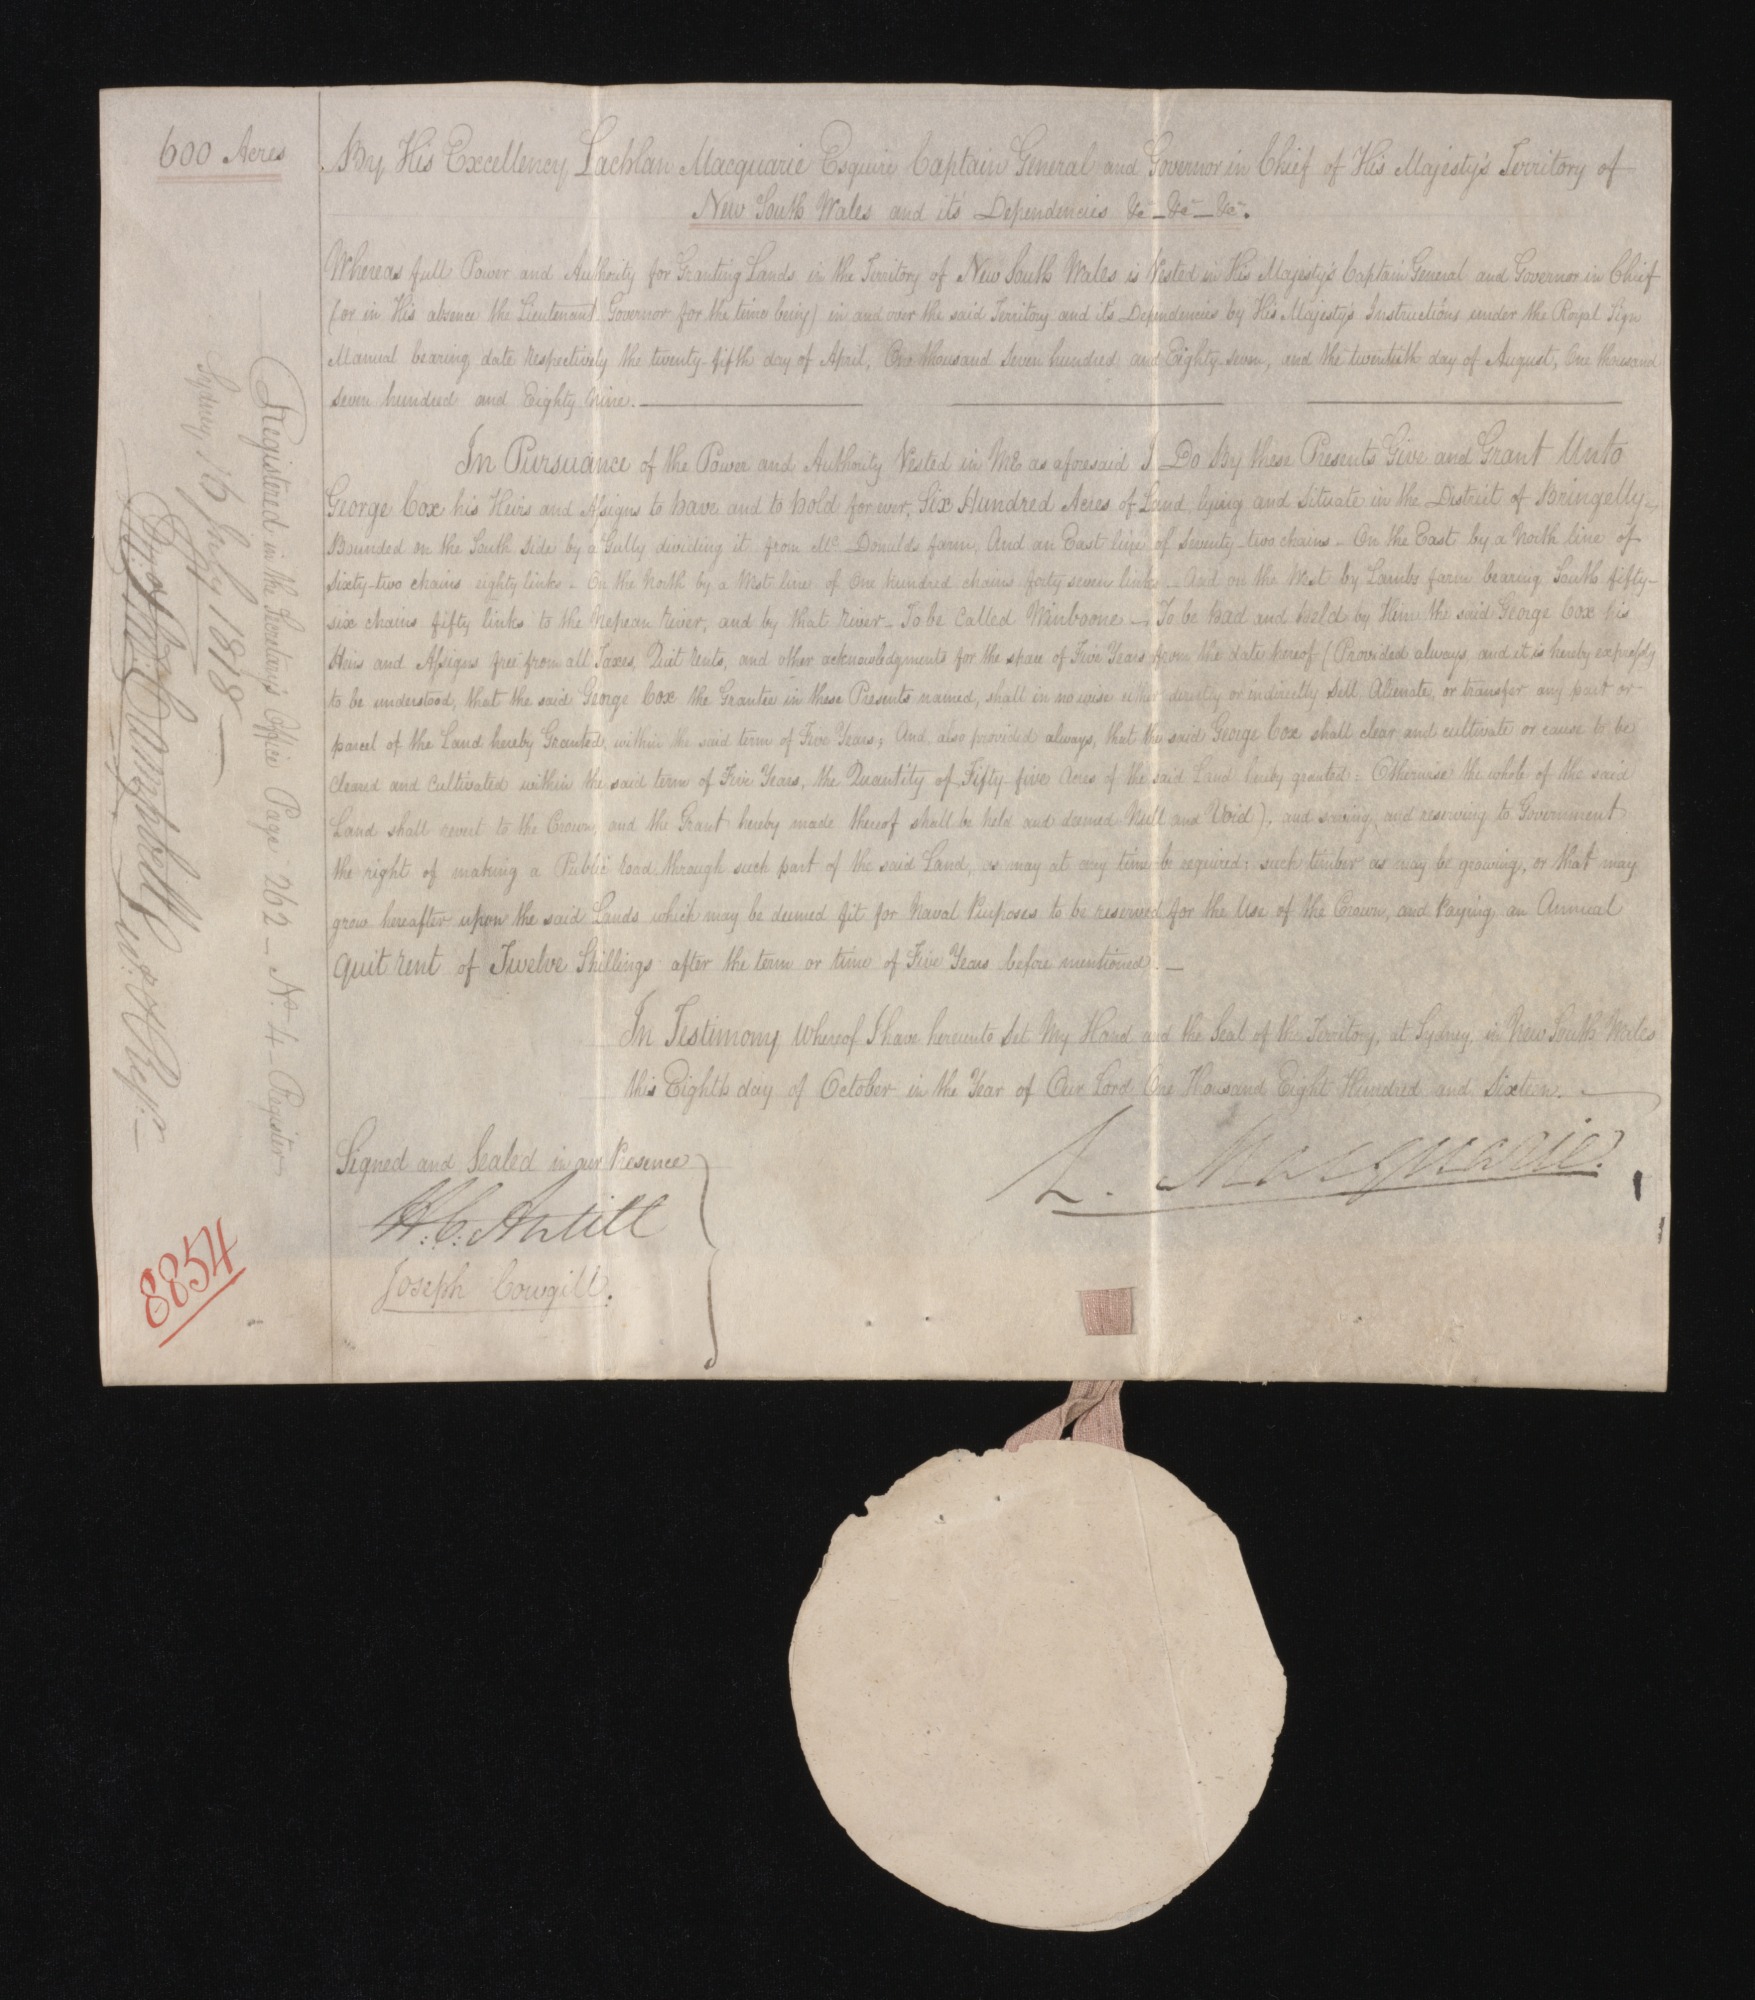 Land grant issued to Gregory Blaxland signed by Governor Lachlan Macquarie, dated 25 August 1812